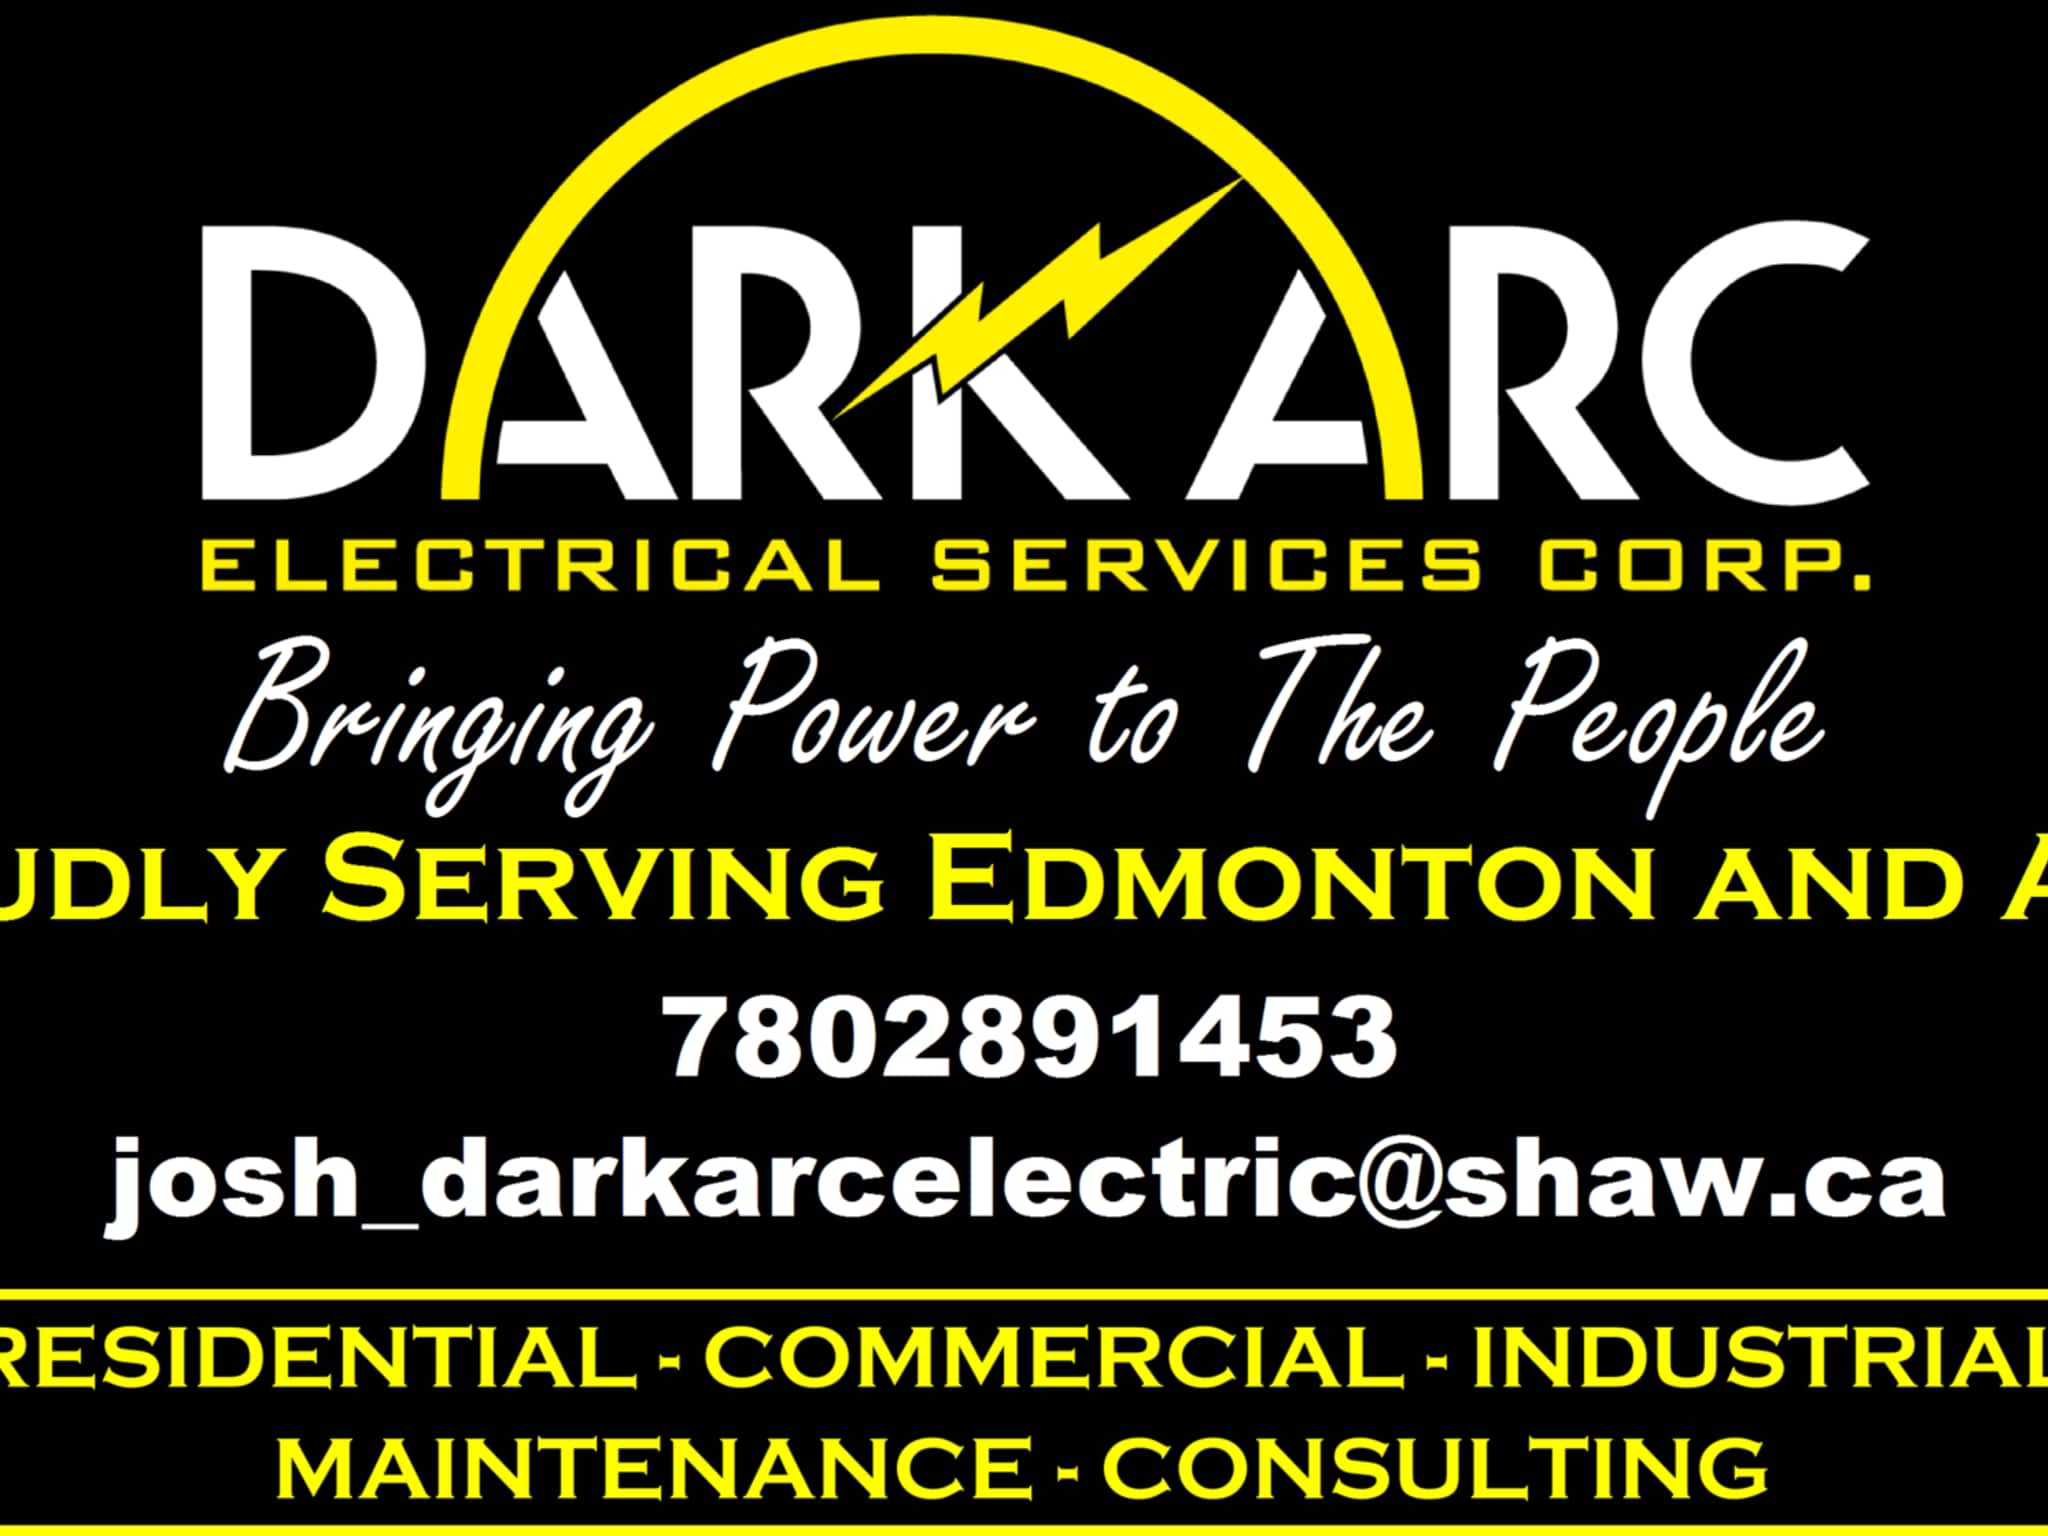 photo DarkArc Electrical Services Corp